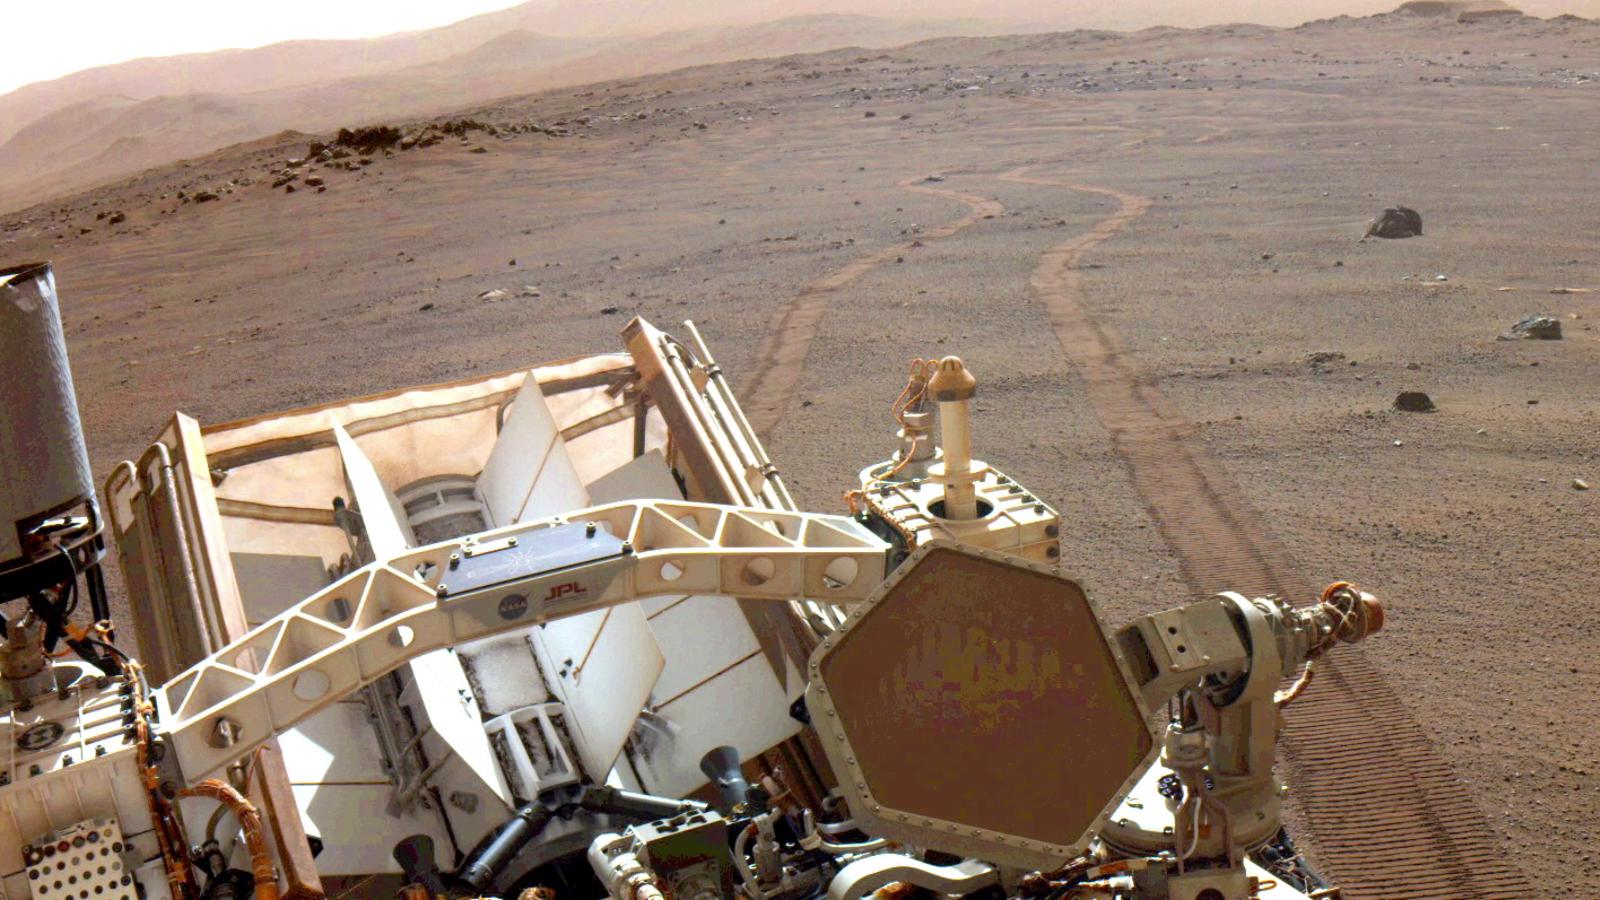 slide 2 - View of Mars with tracks left by Perseverance rover